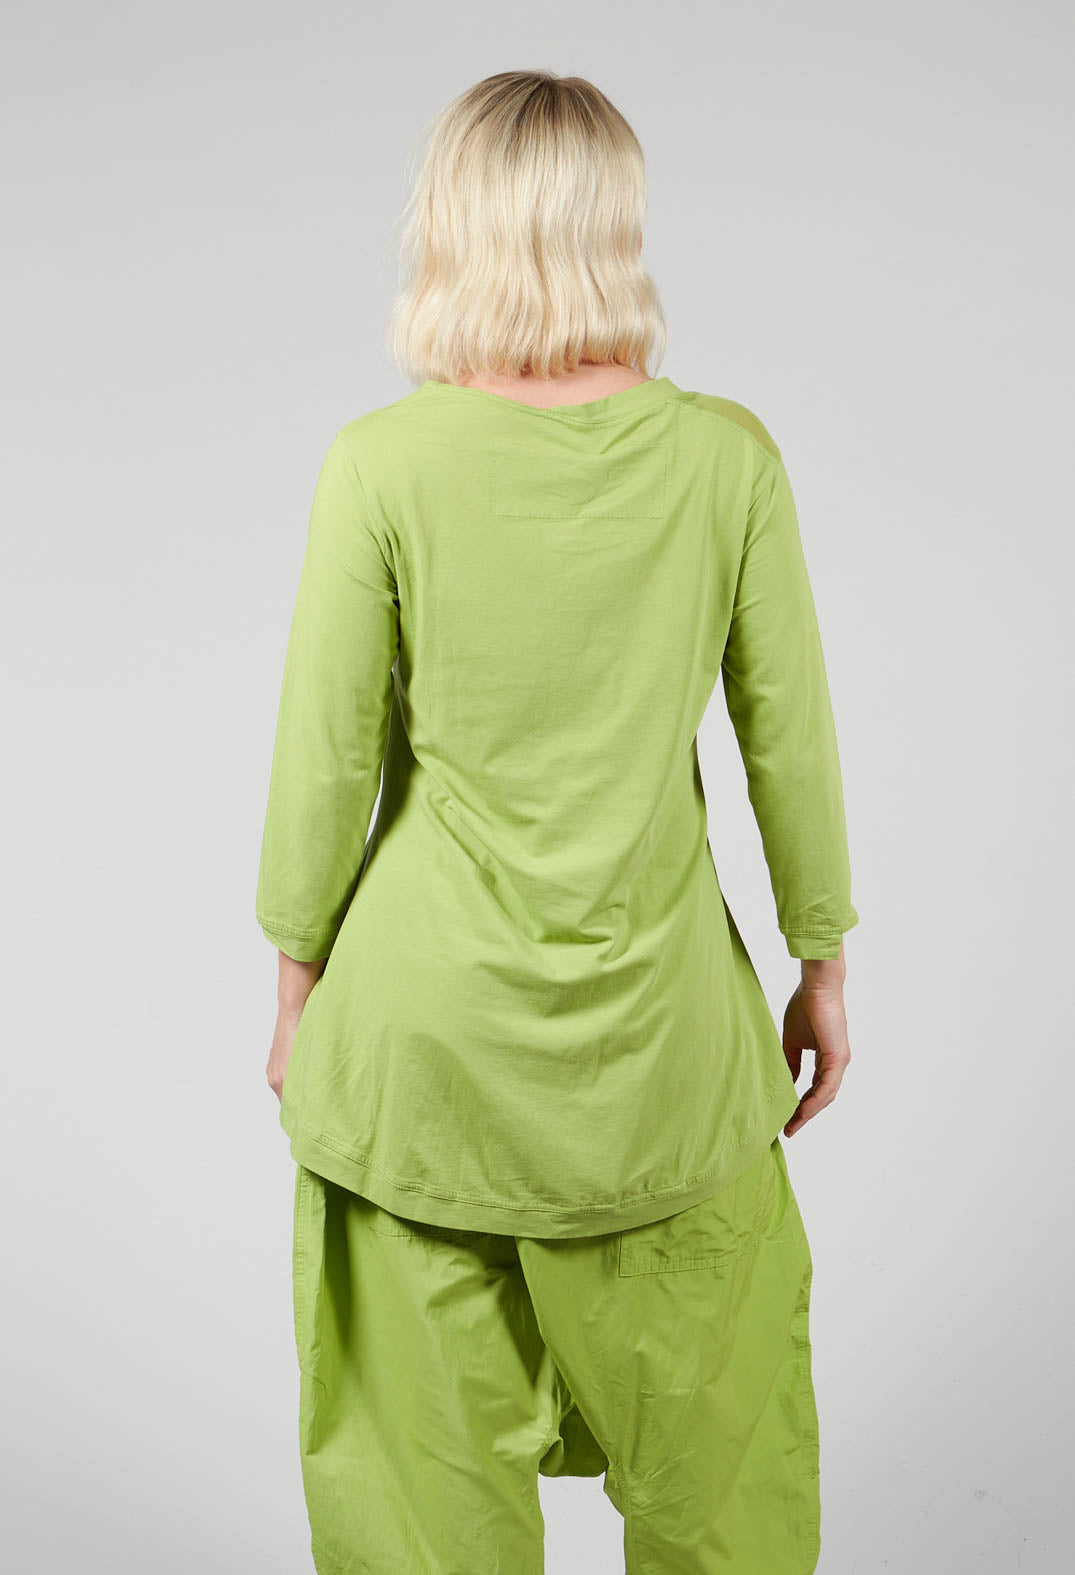 T-Shirt with Three-Quarter Length Sleeves and Cut Out Neckline Detail in Kiwi